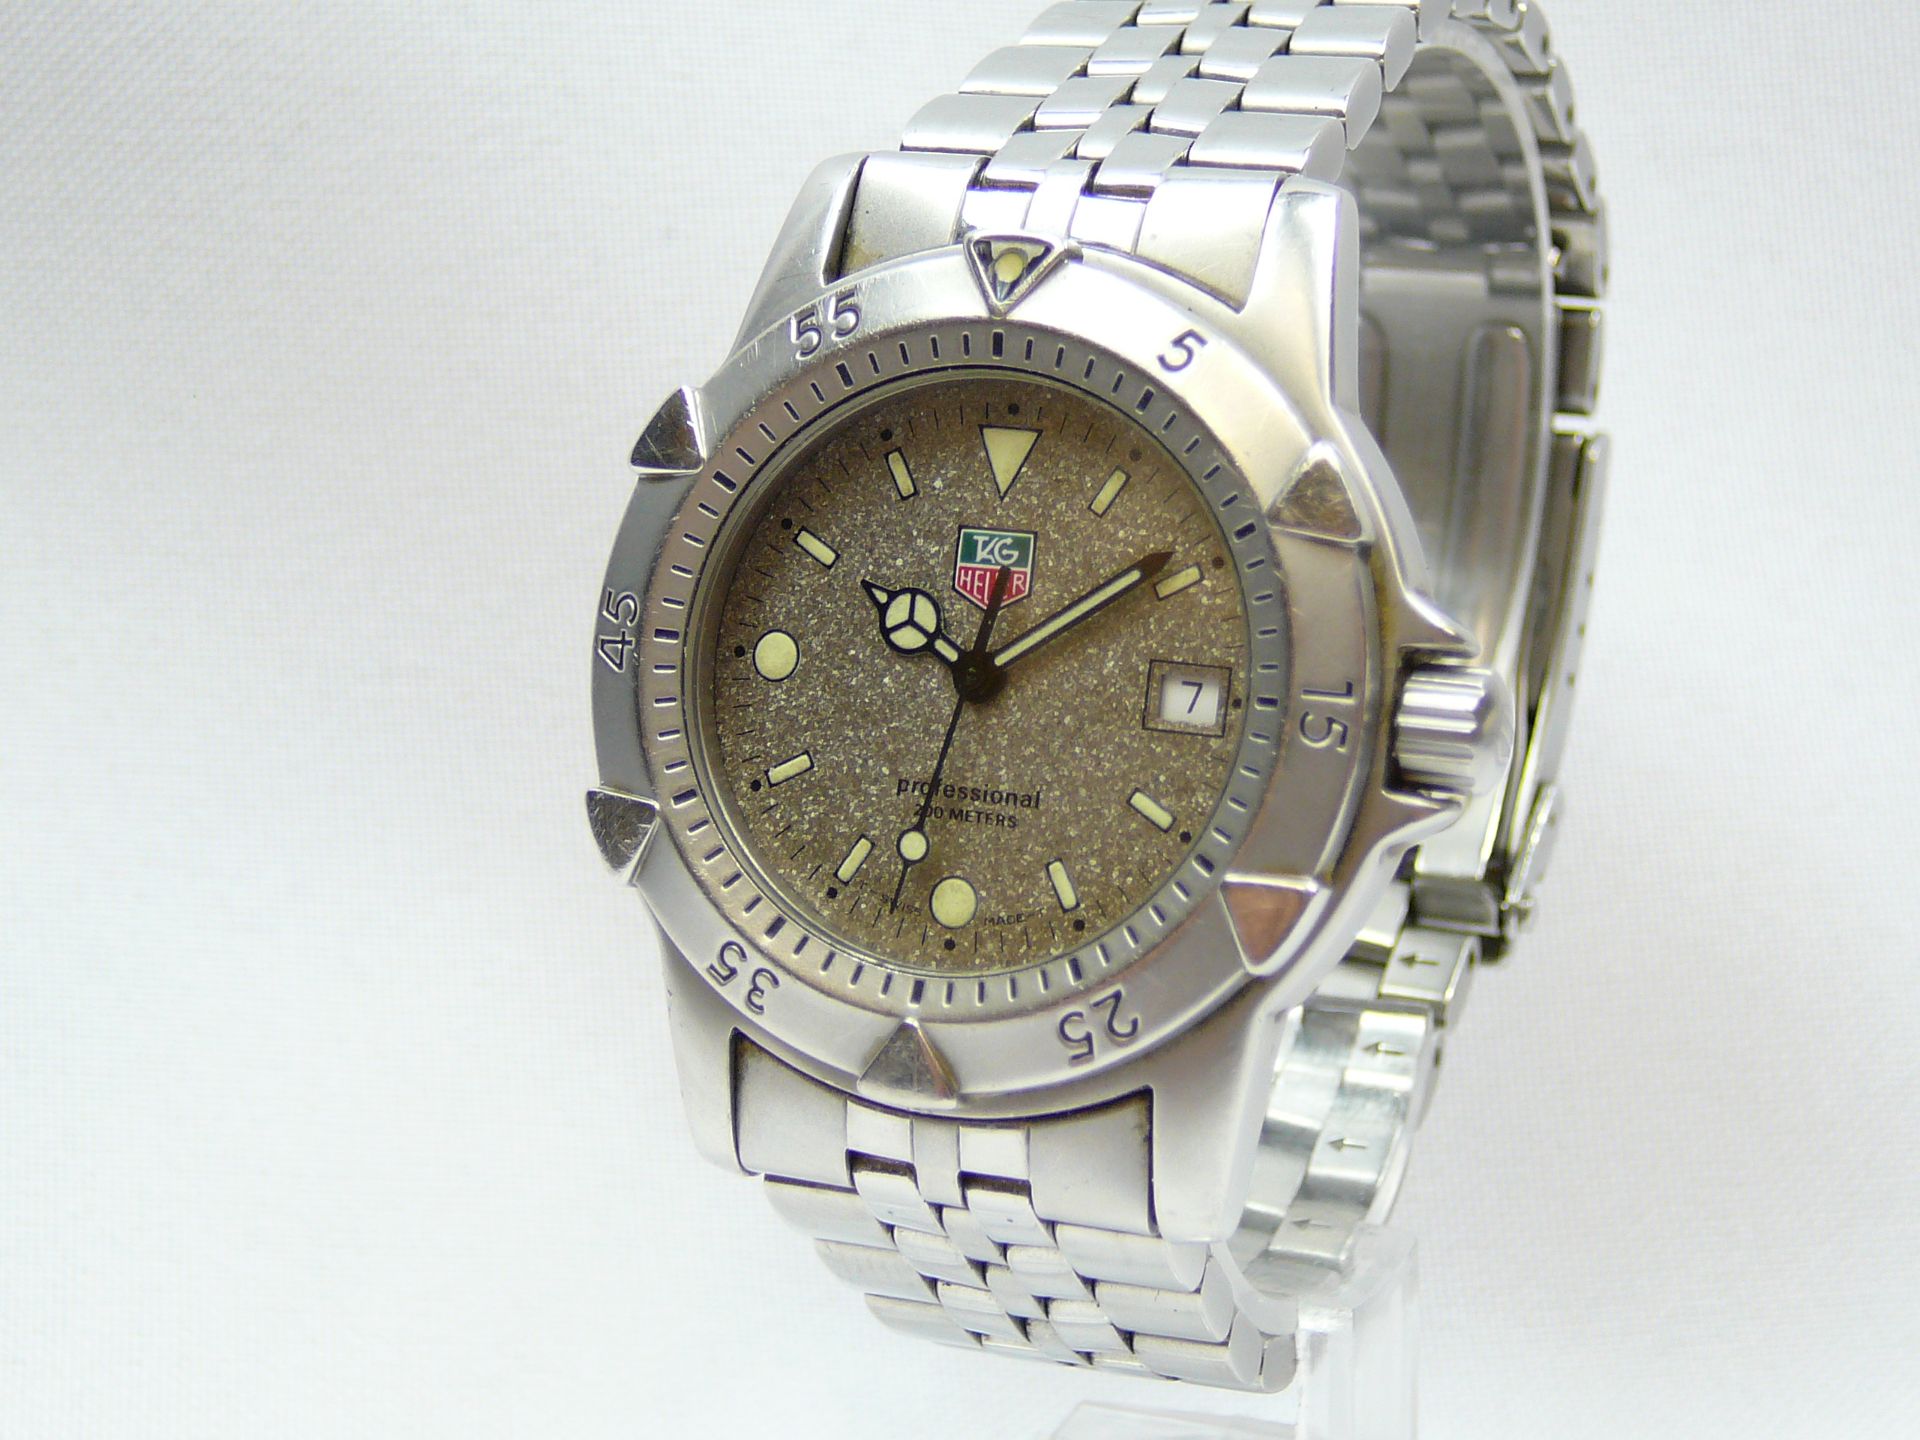 Gents TAG Heuer Wristwatch - Image 2 of 3